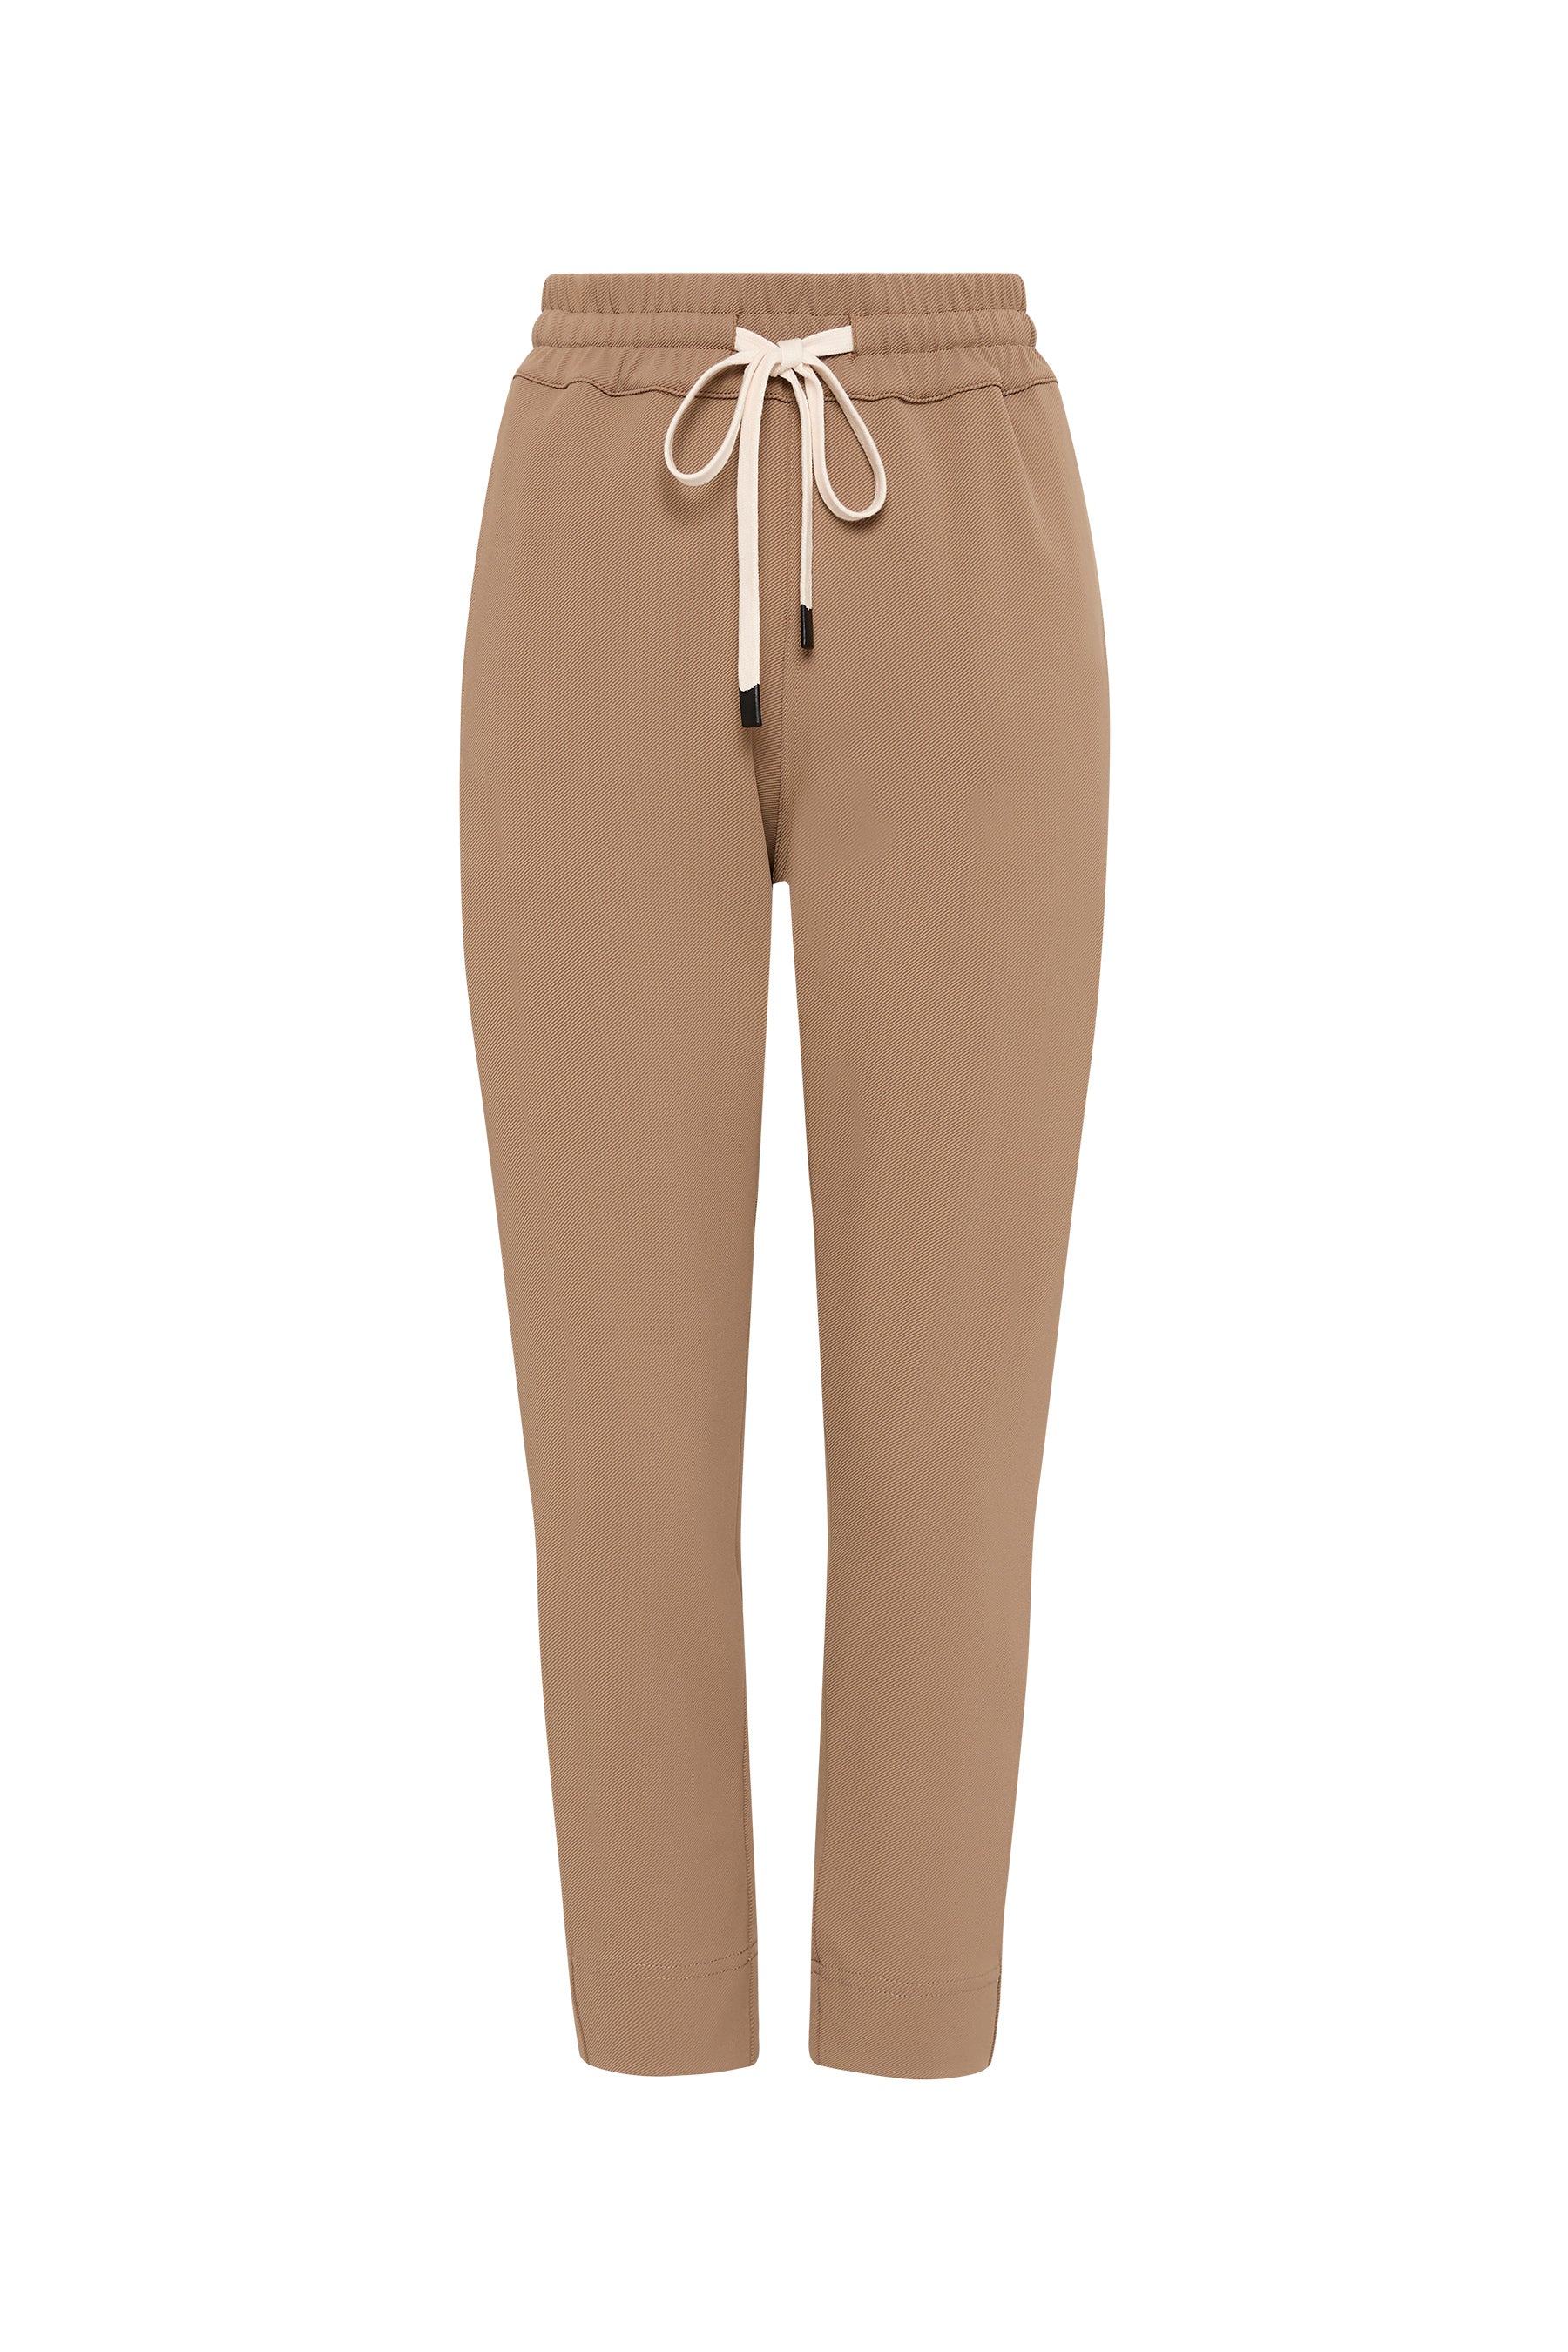 stretch Twill Tapered Pant in Tan